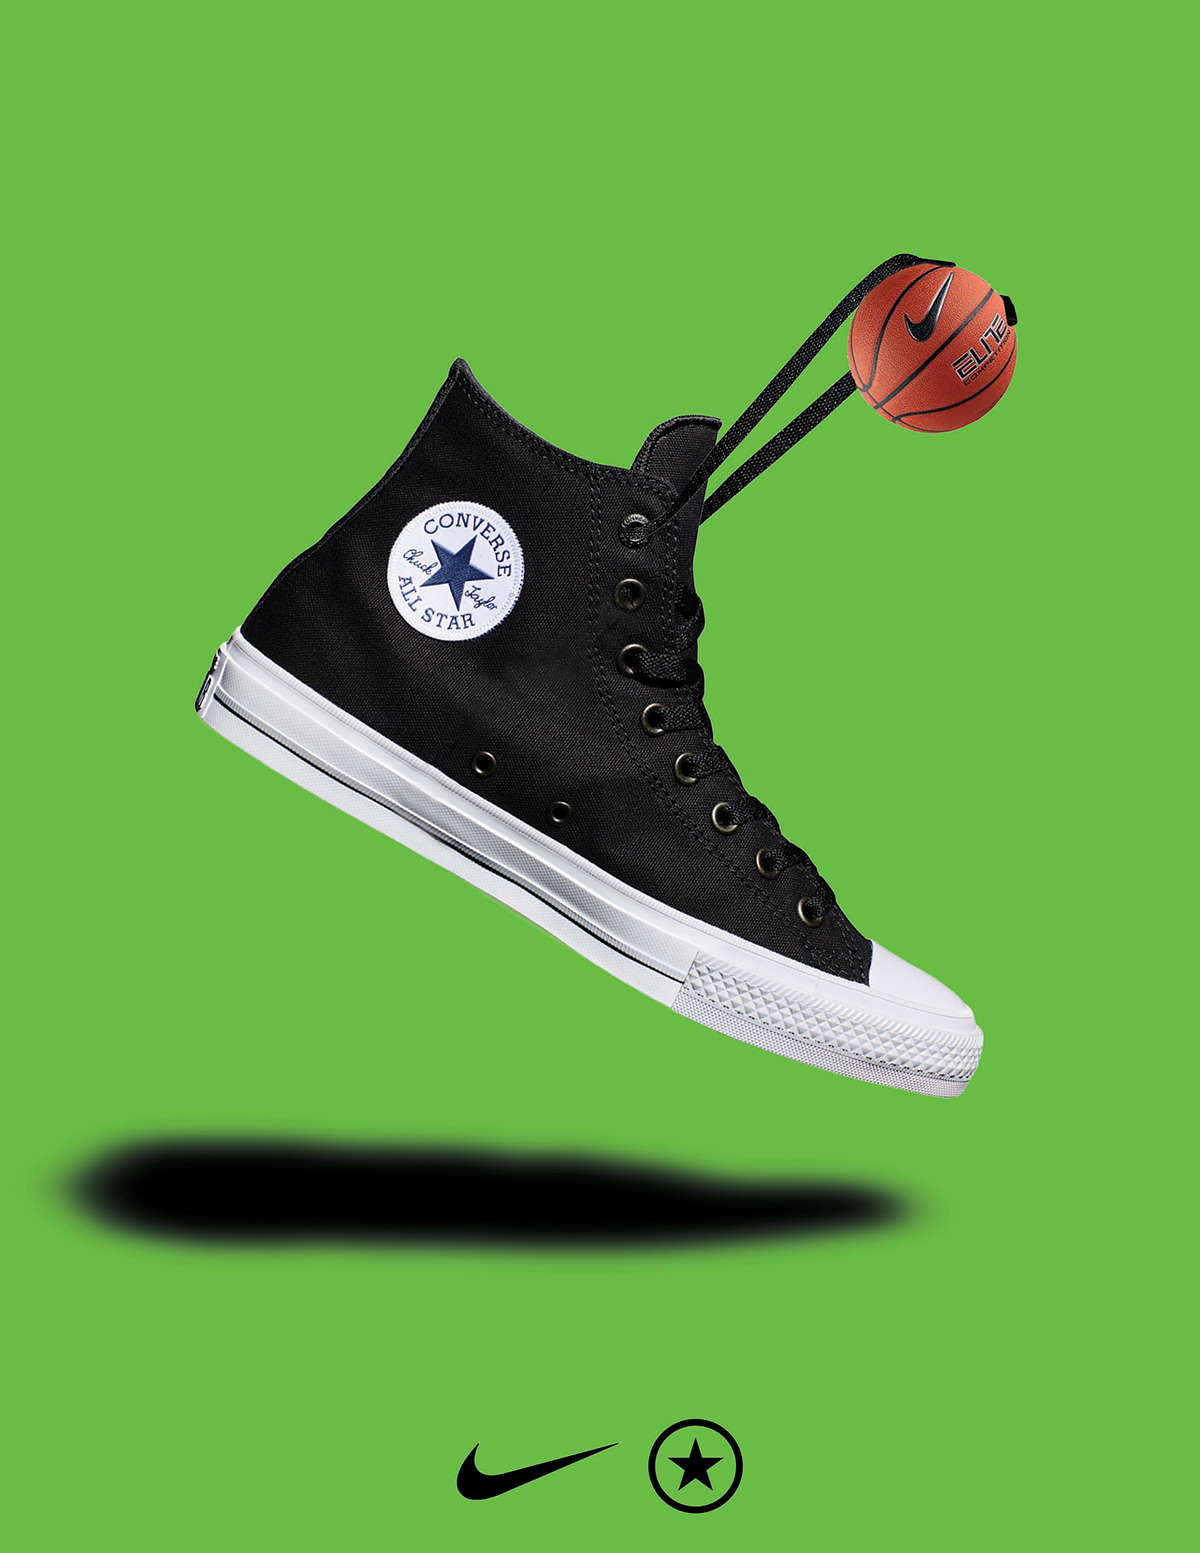 shoes Nike chucks chucktaylor converse Classic running sneakers runningshoes trends prints ads funny dunking design